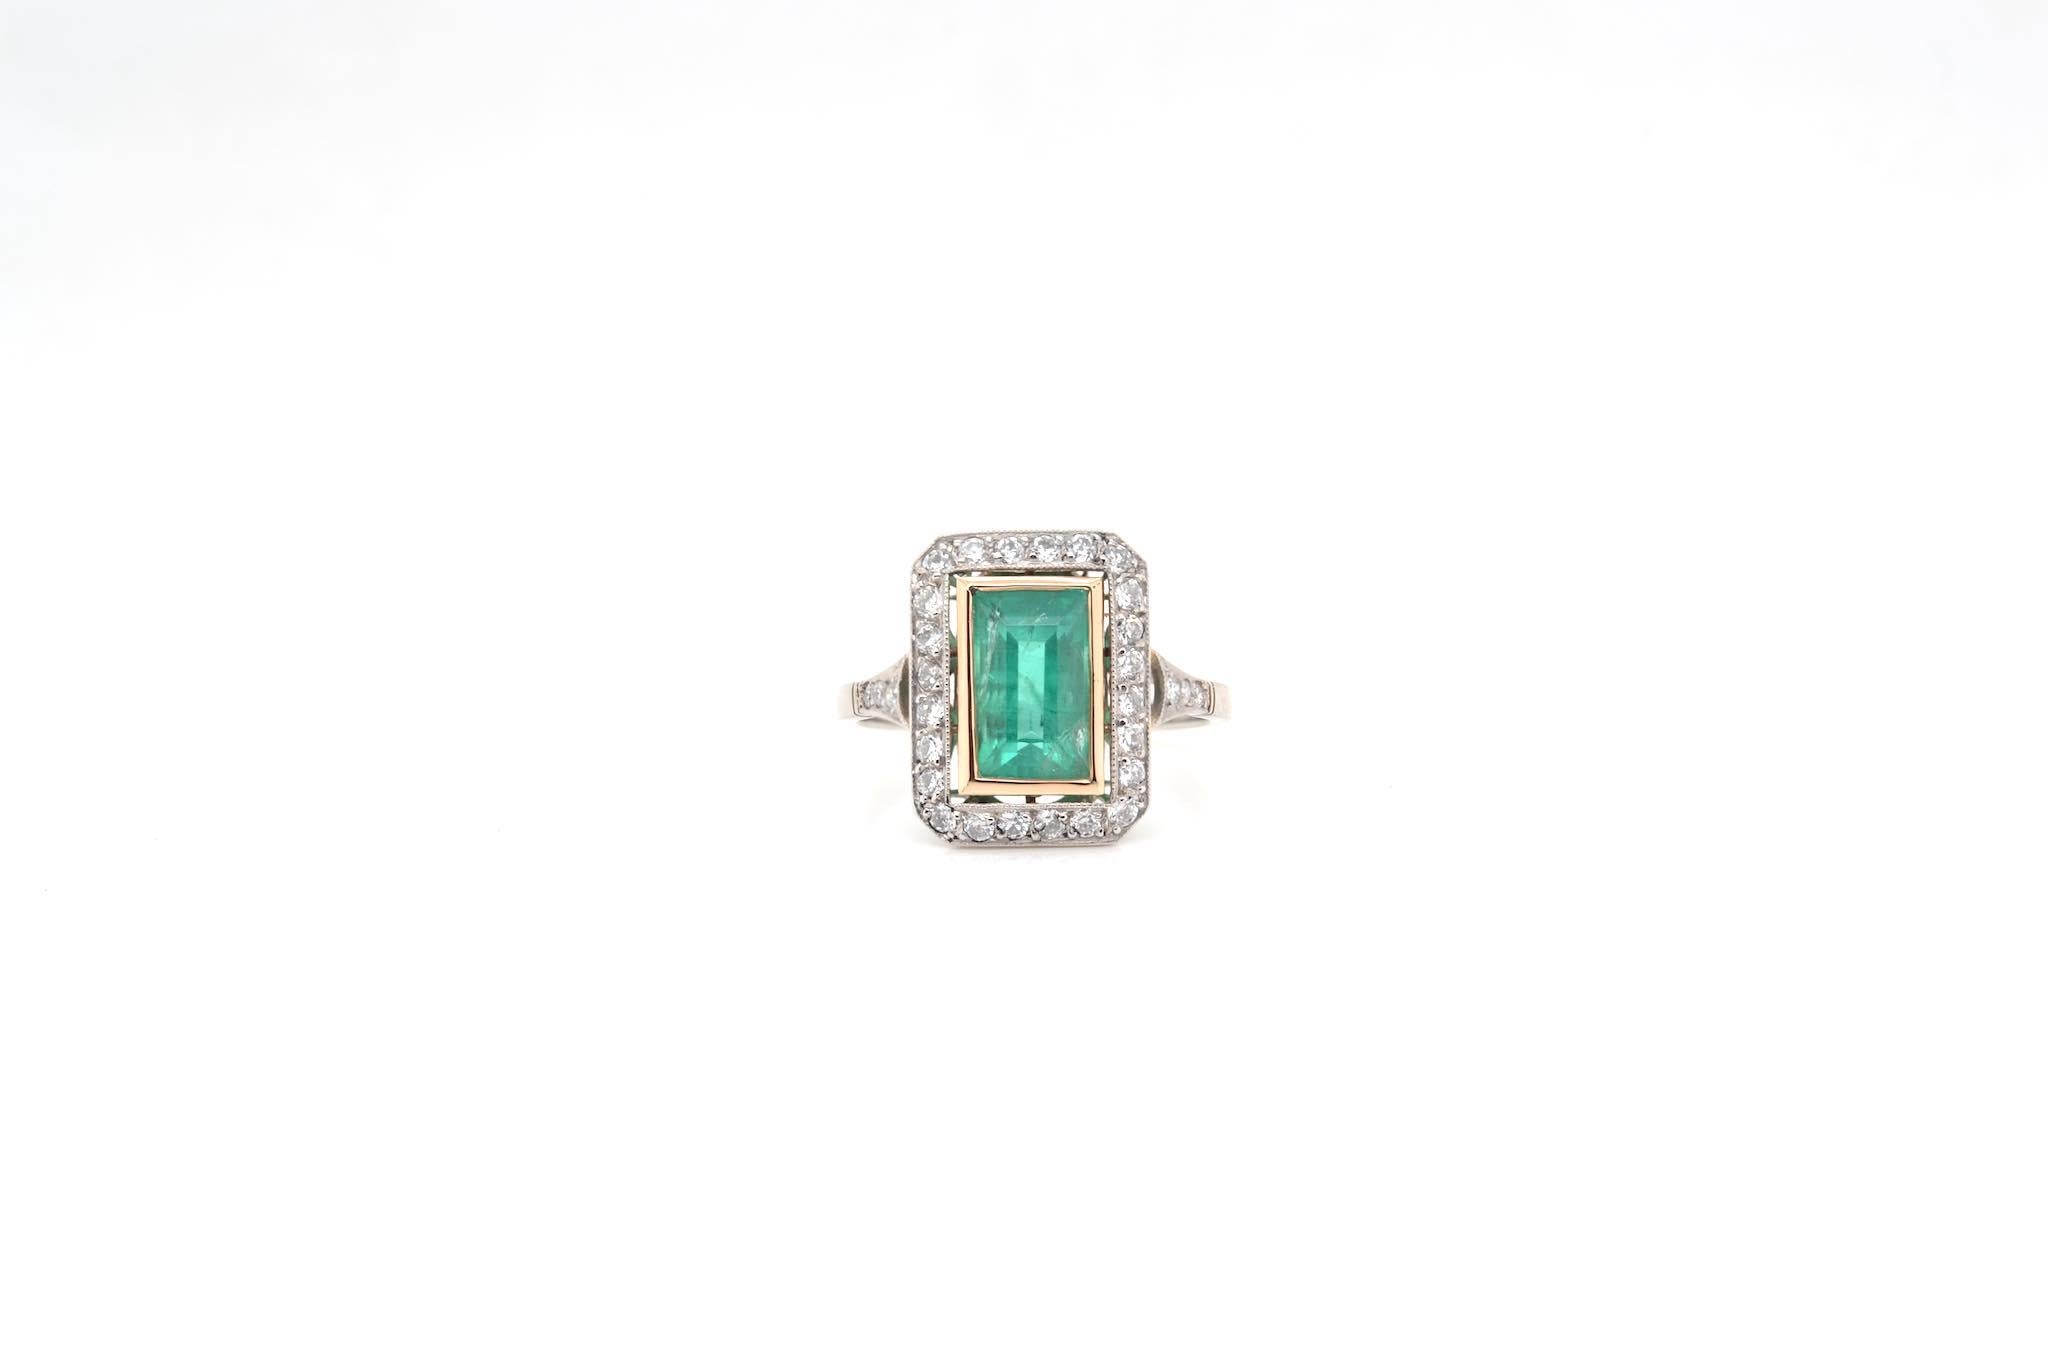 Stones: 1.66 carat Emerald and diamonds
For a total weight of 0.30 carats.
Material: 18k yellow gold and platinum
Dimensions: 15 mm long over the shoulder
Weight: 3.9g
Size: 53 (free sizing)
Certificate
Referee. : 24221 / 24039